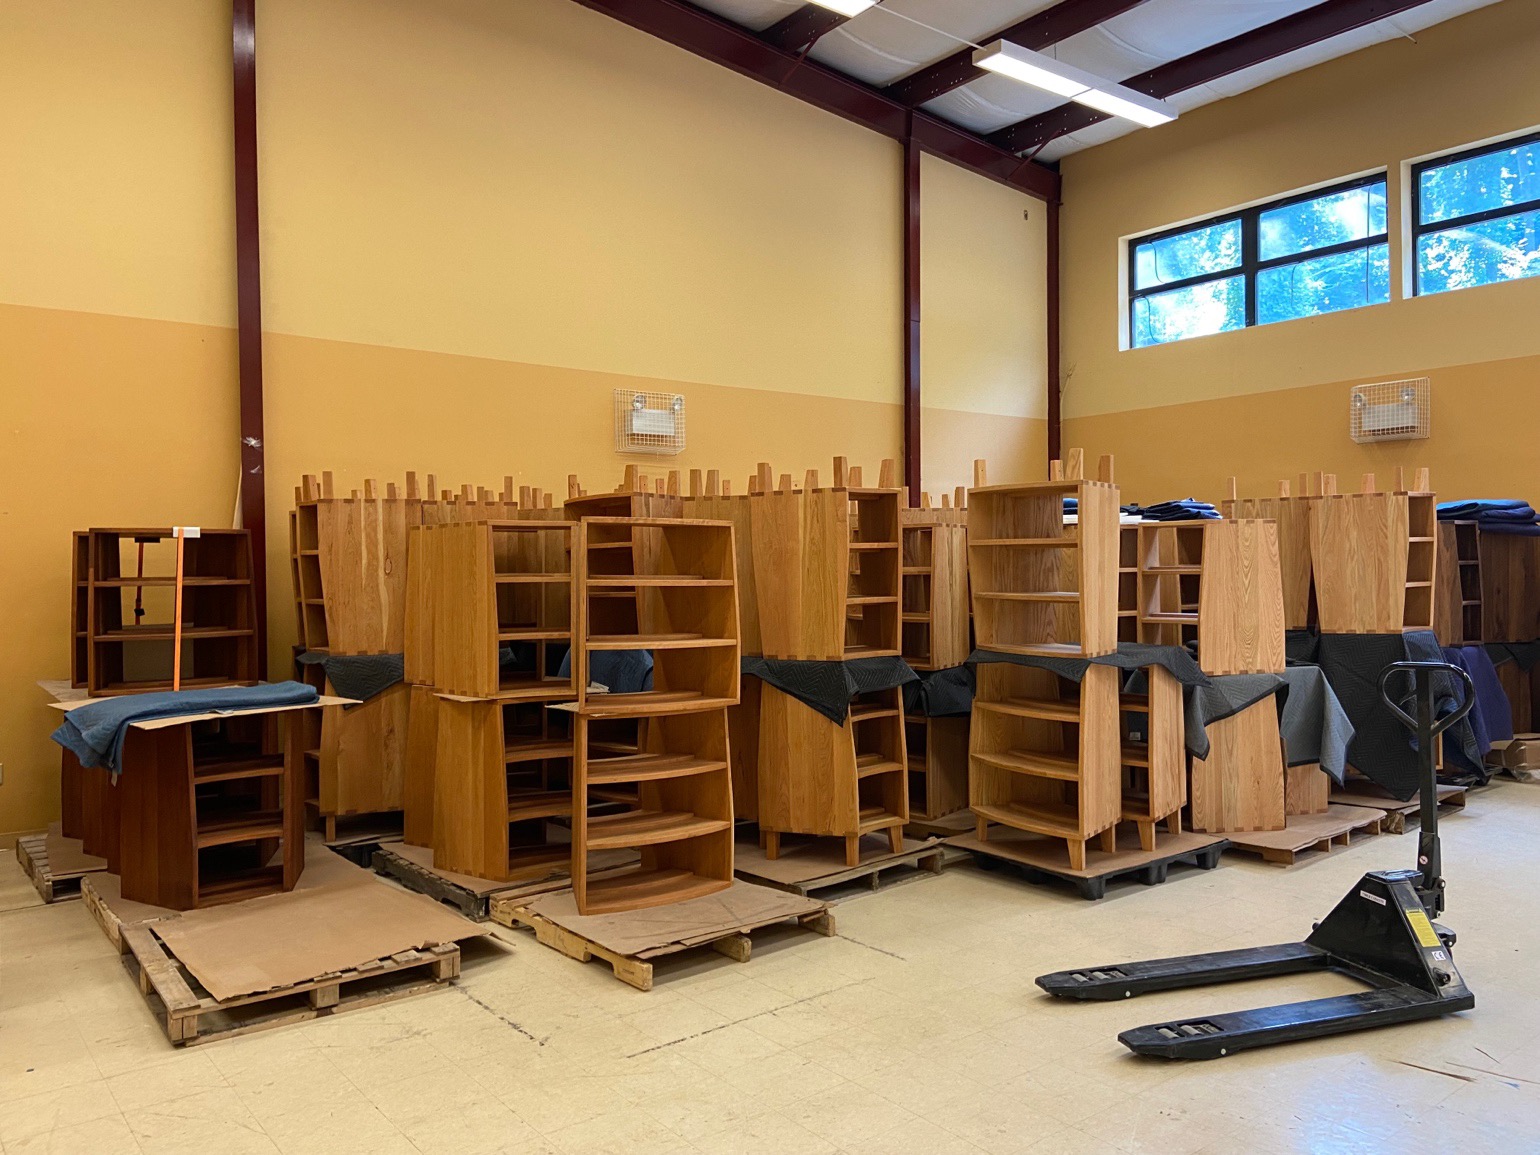 Handcrafted bookcases at Freedom Reads’ headquarters, in production and waiting to be transported to Freedom Library openings in prisons and juvenile detention centers across the nation.